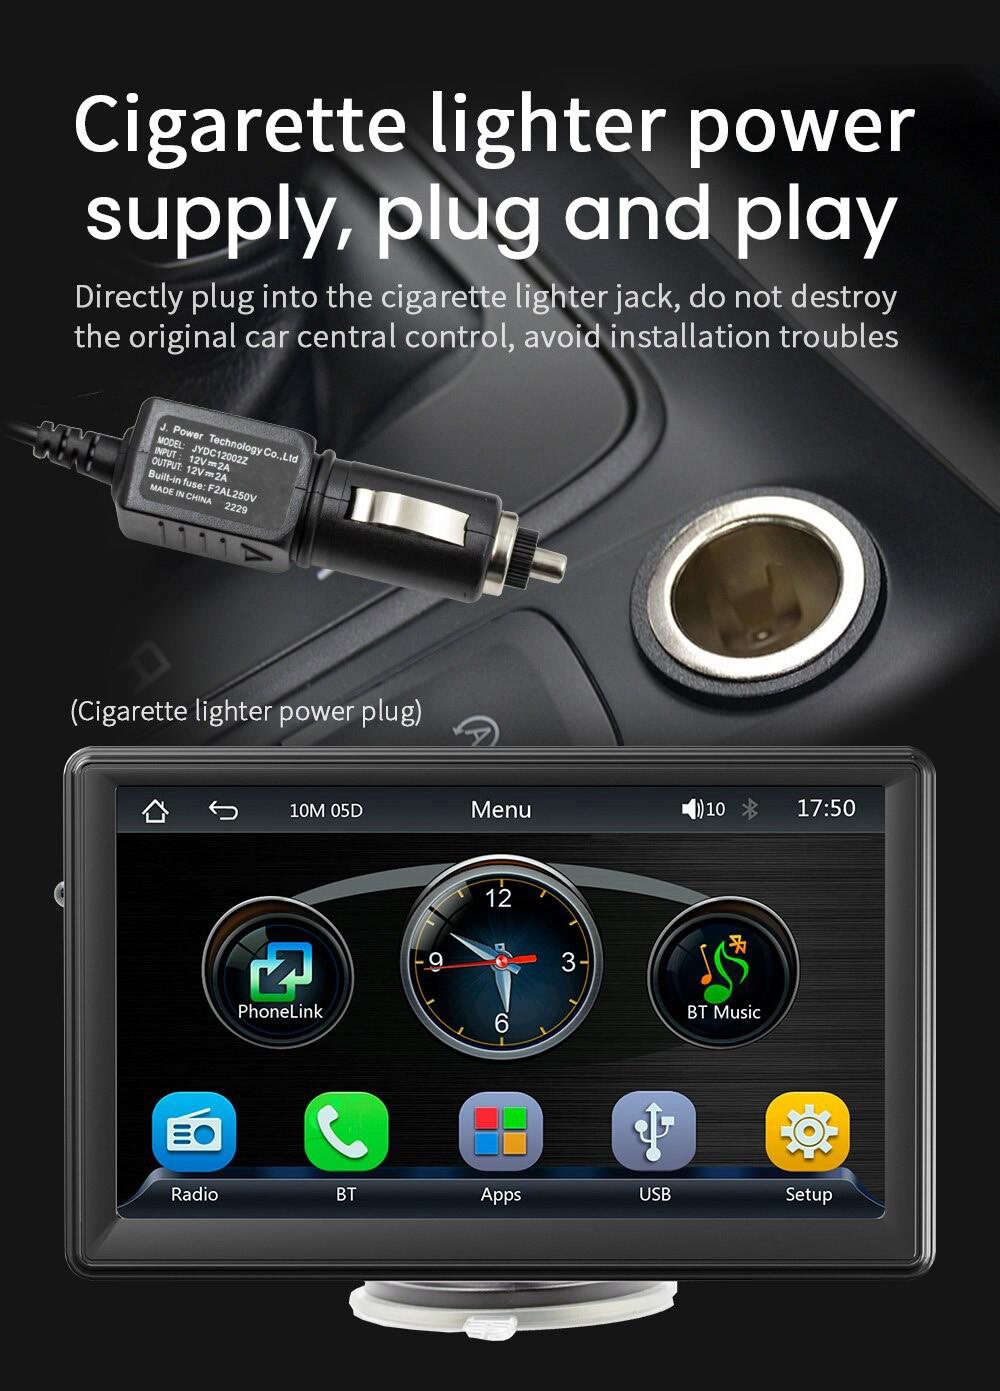 Portable Car MP5 Player, FM Radio, 7-inch Touch Screen, with sunshade, Support Bluetooth Music & Hands-free Calling